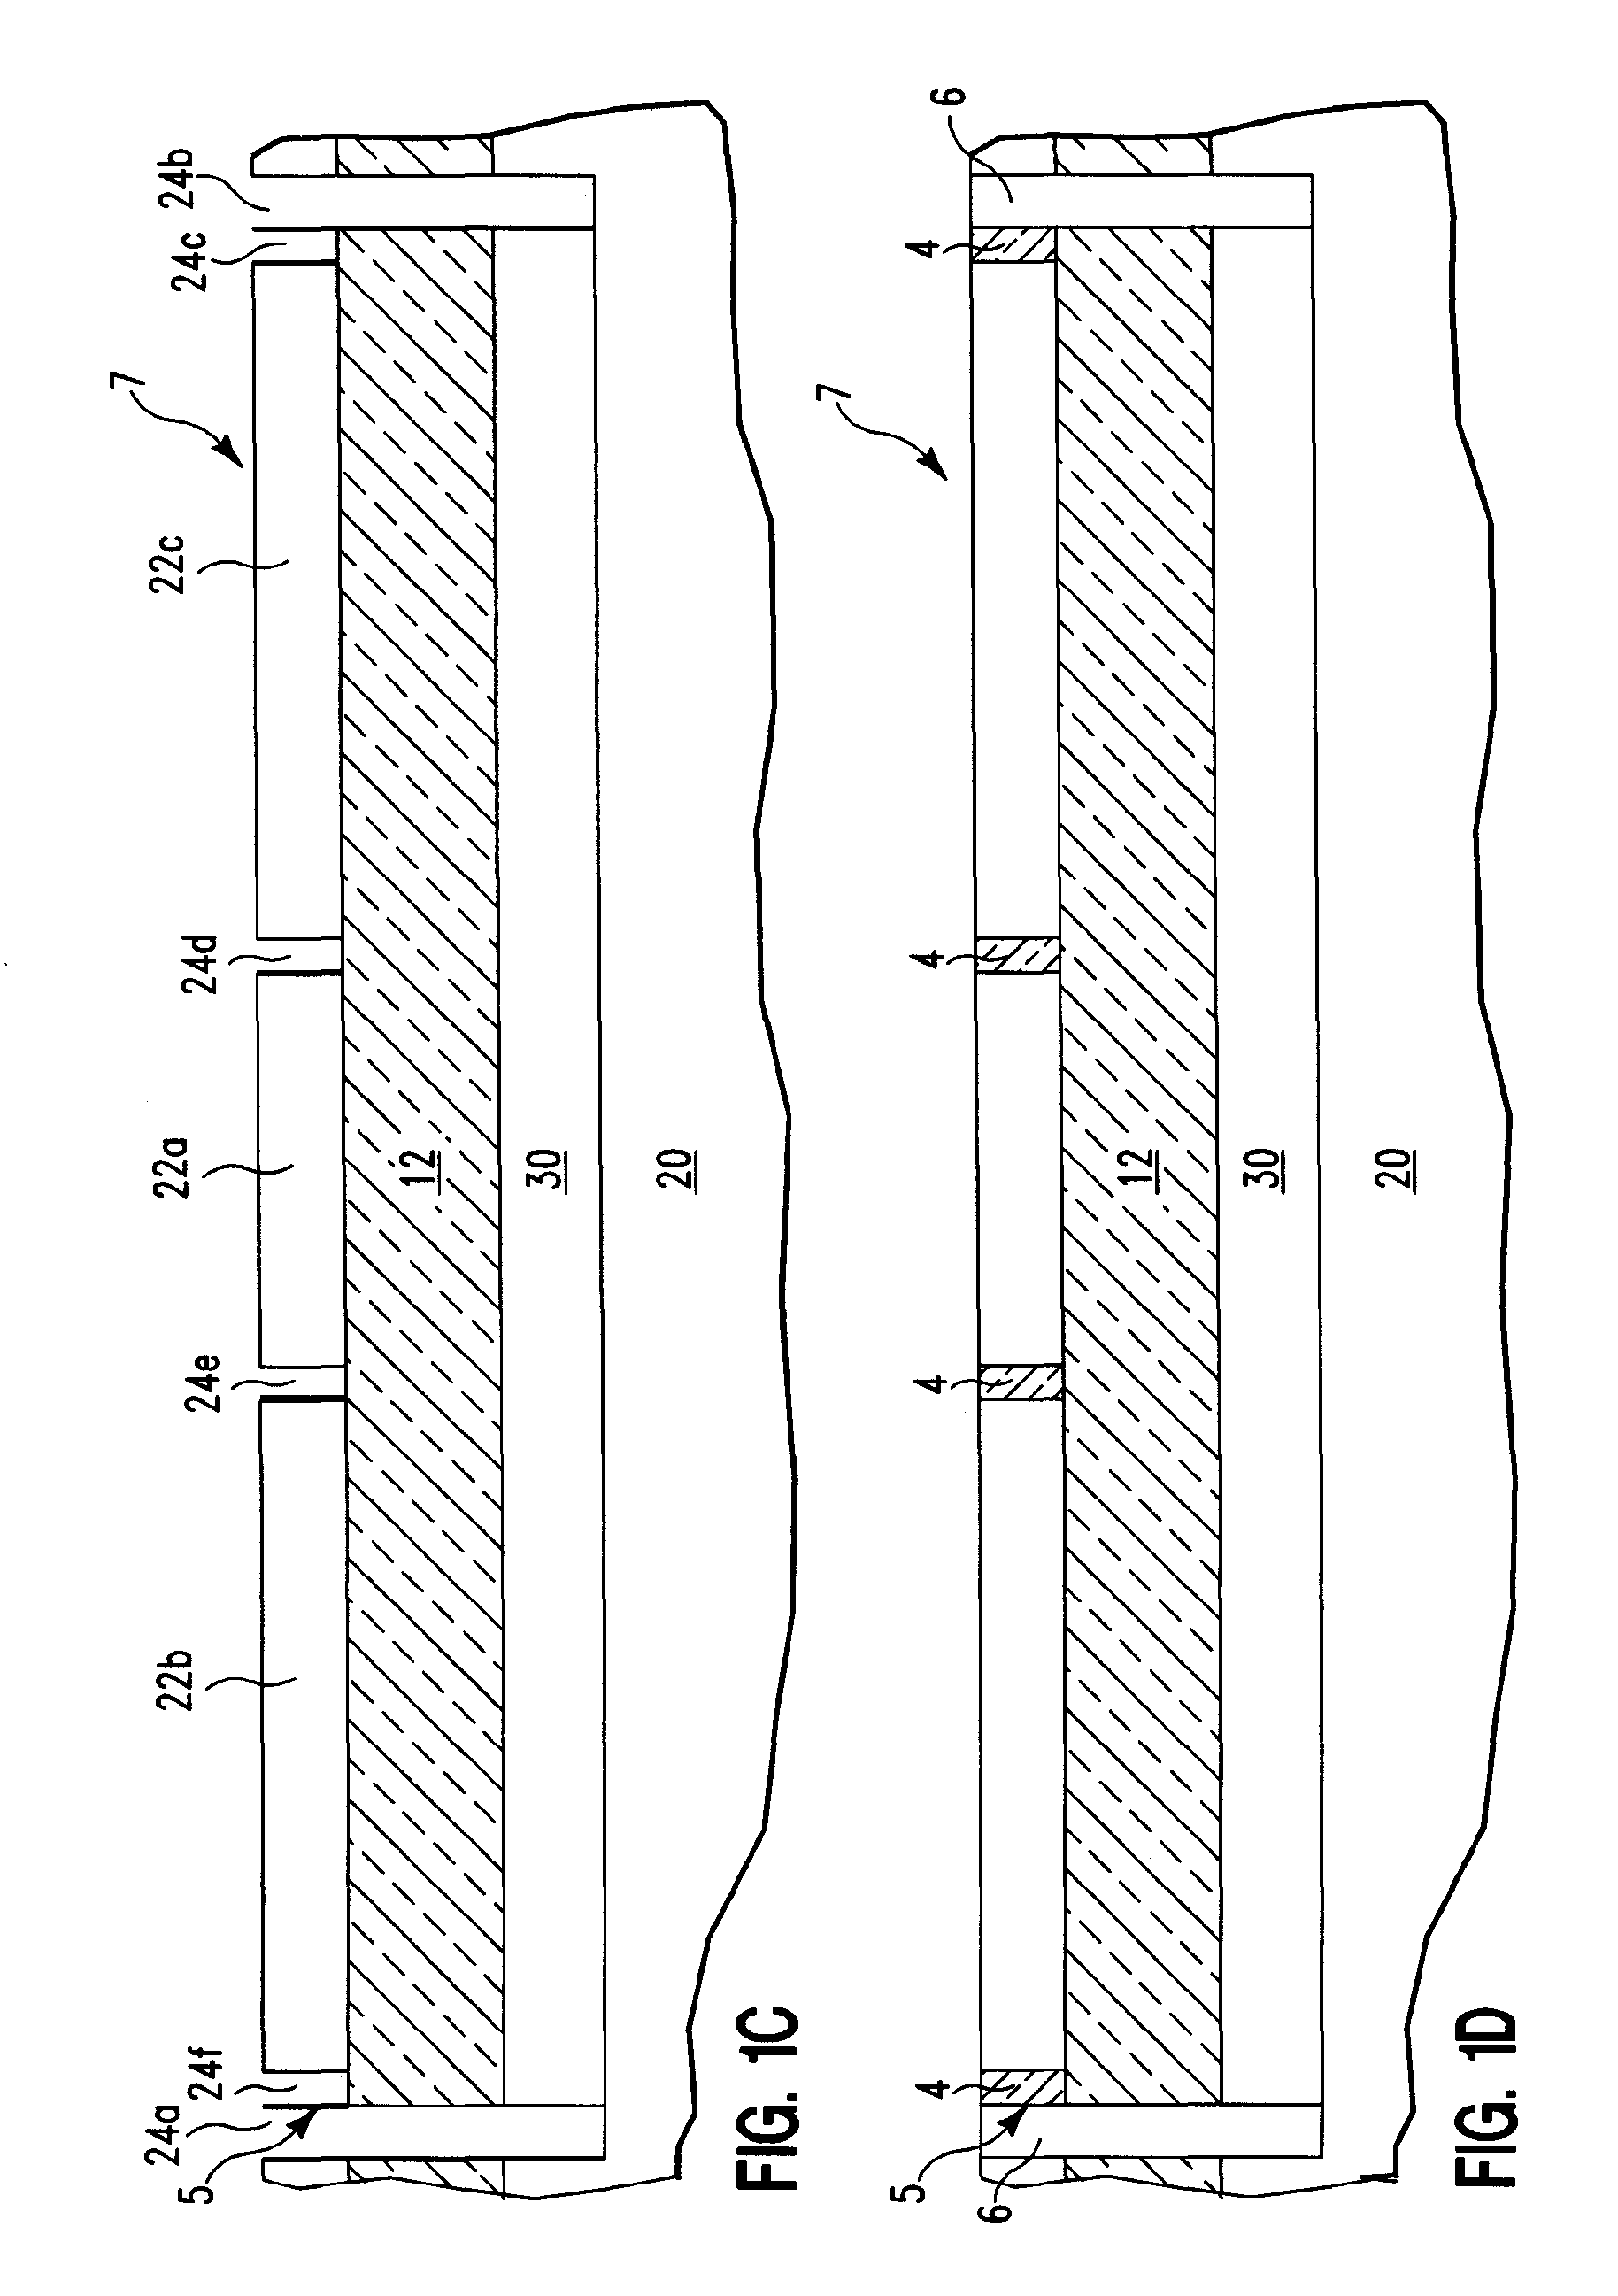 Heater for annealing trapped charge in a semiconductor device